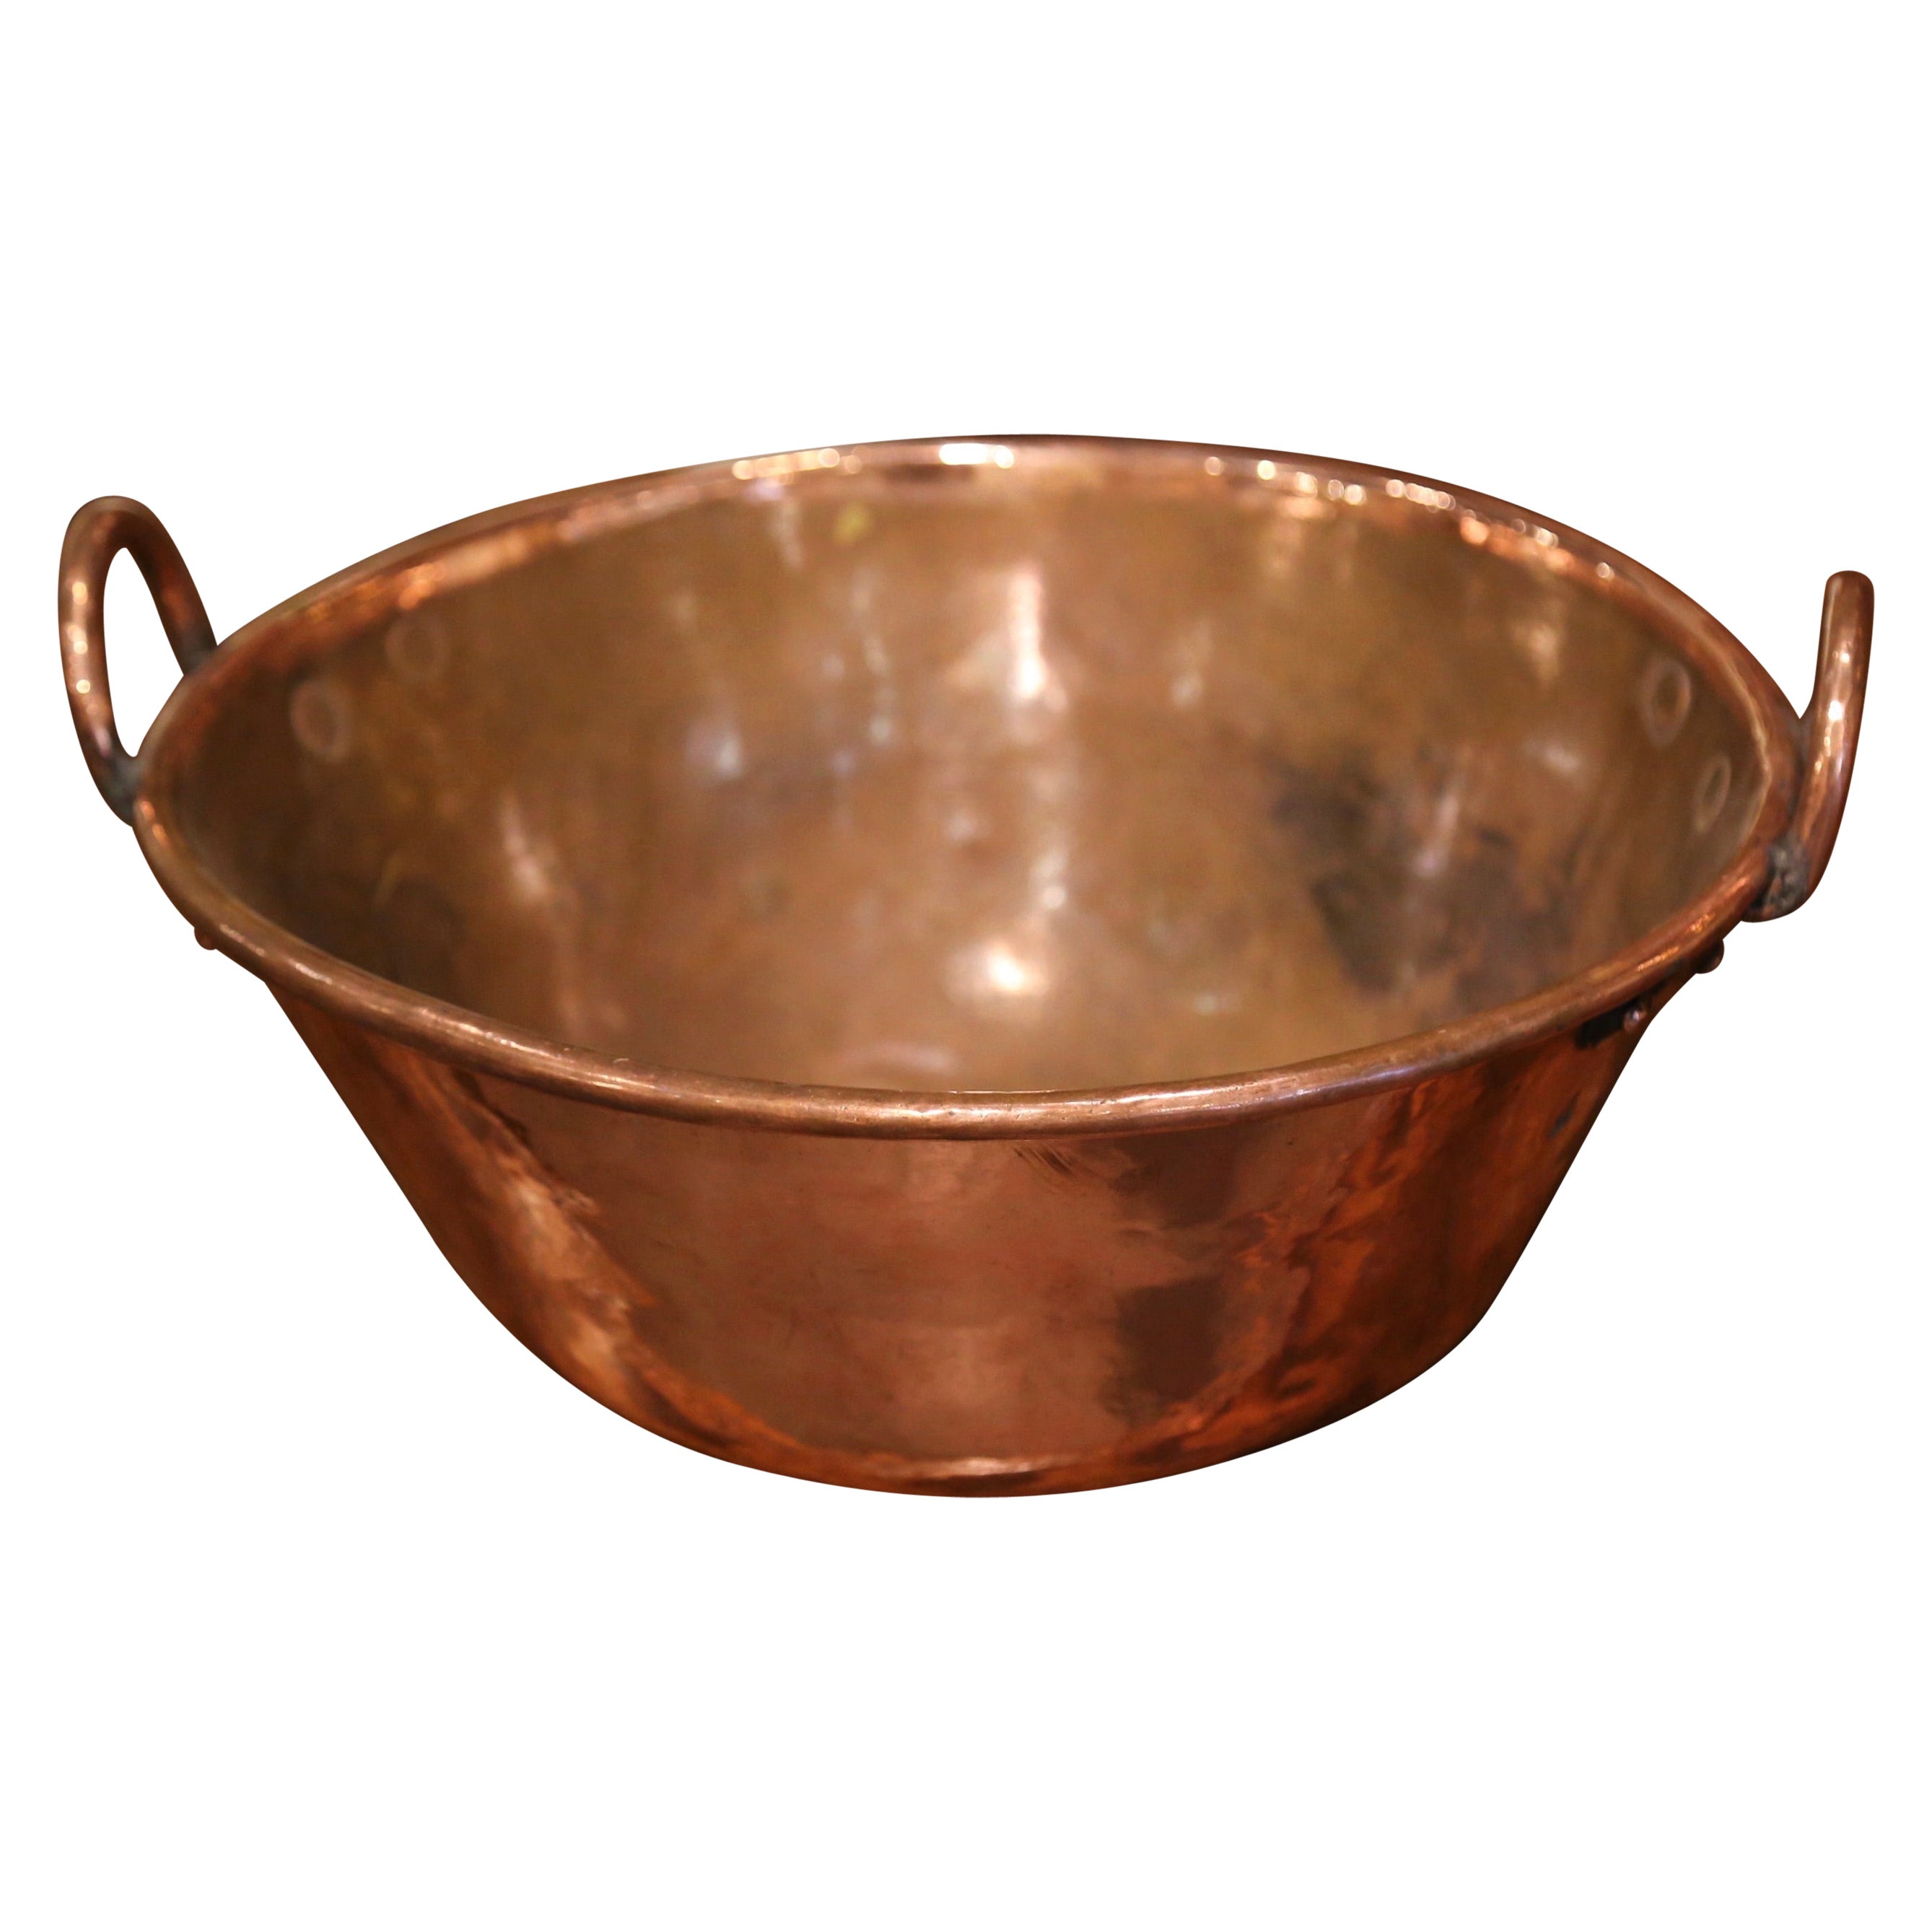 Mid-19th Century French Copper and Brass Jelly Bowl from Normandy